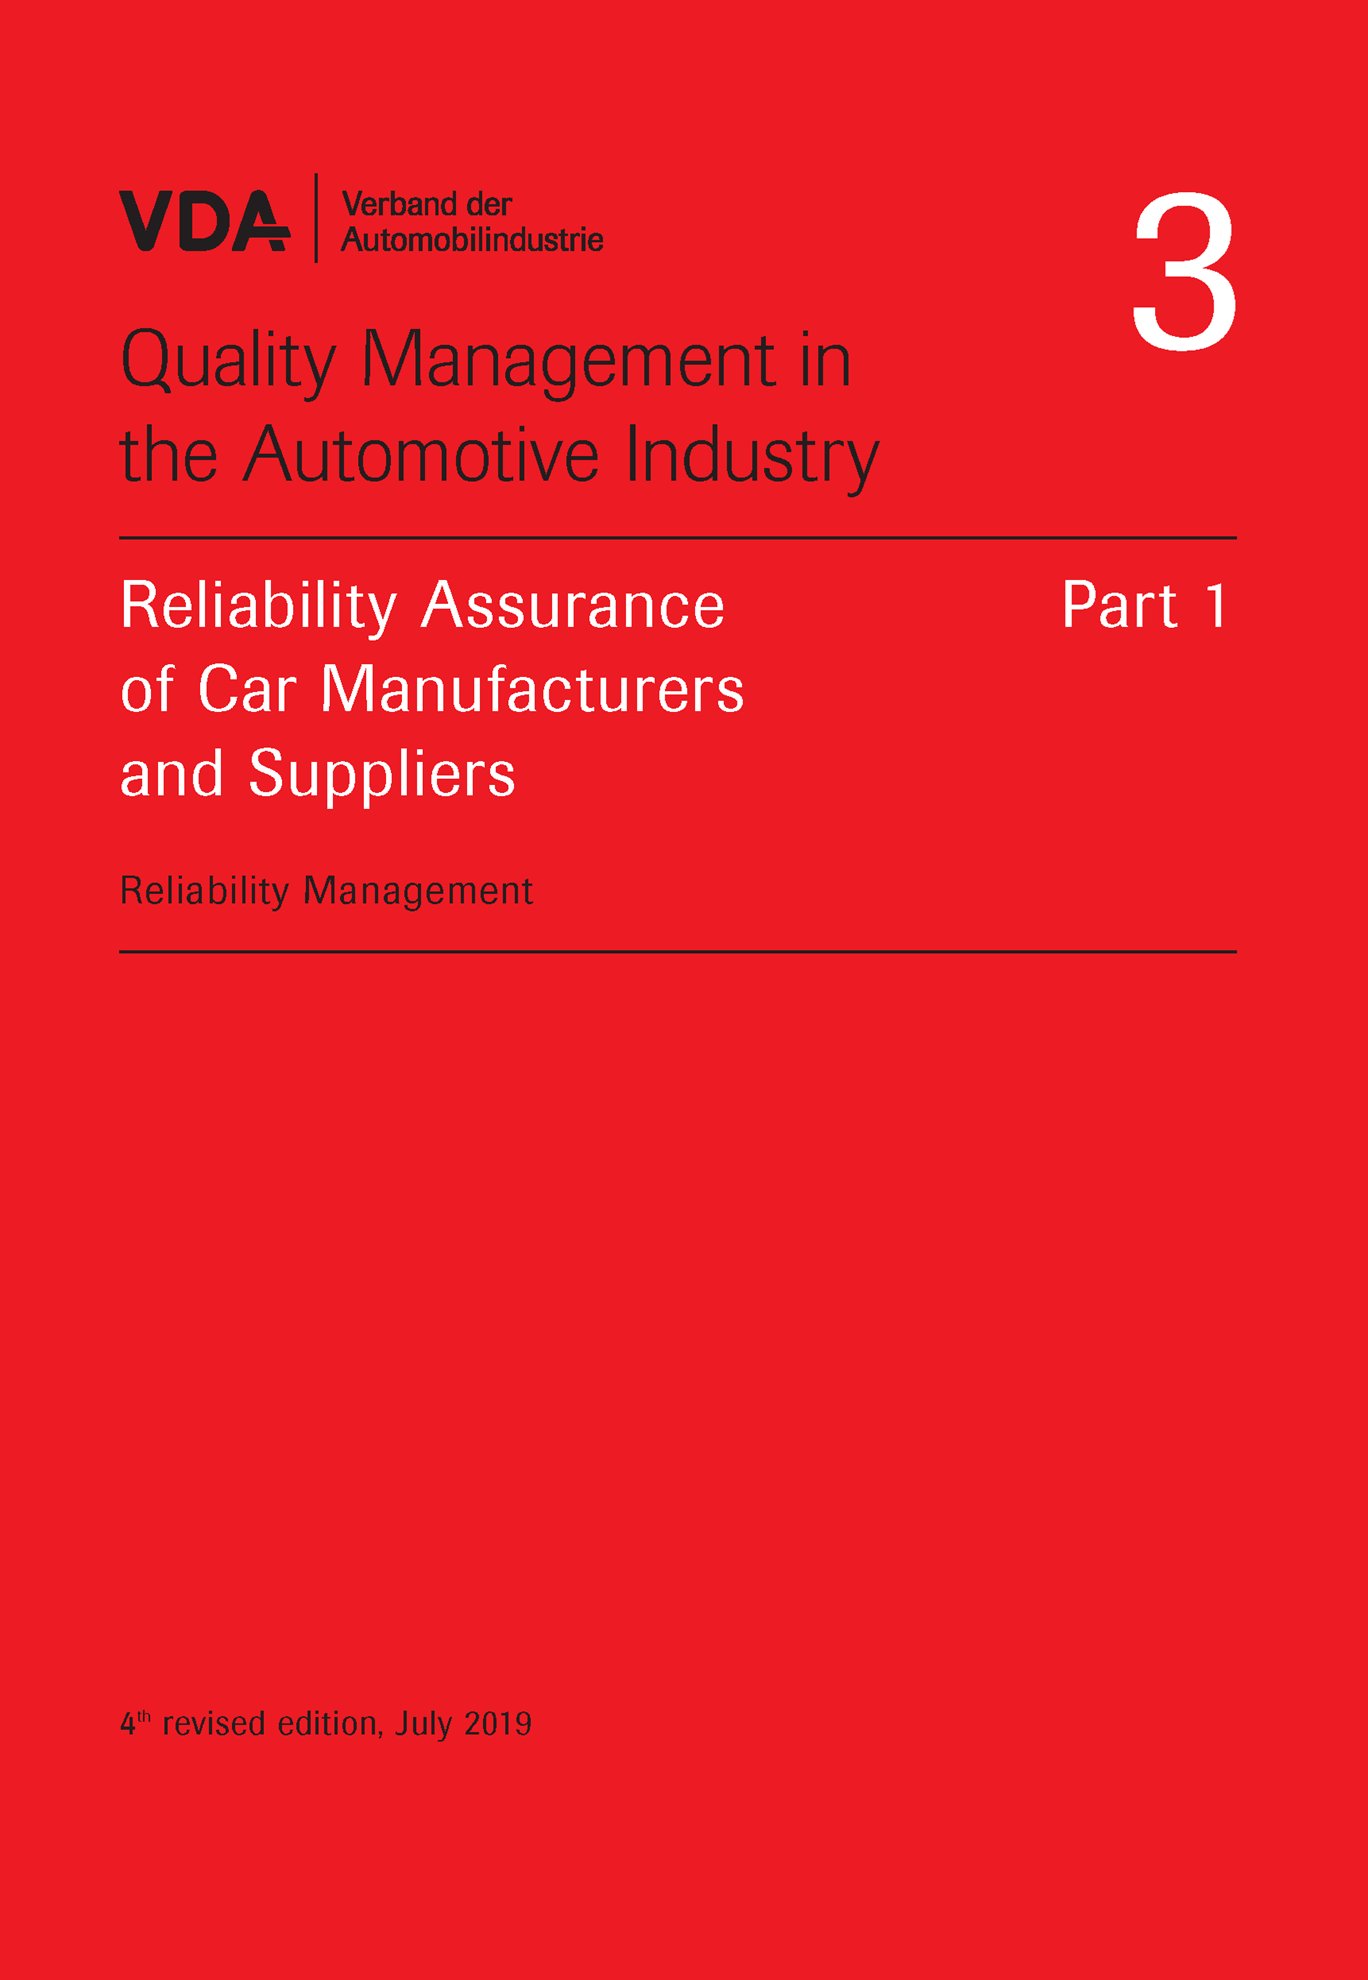 Publikace  VDA Volume 3 Part 1 Reliability Assurance of Car Manufacturers and Suppliers - Reliability Management, 4th revised edition, July 2019 1.7.2019 náhled